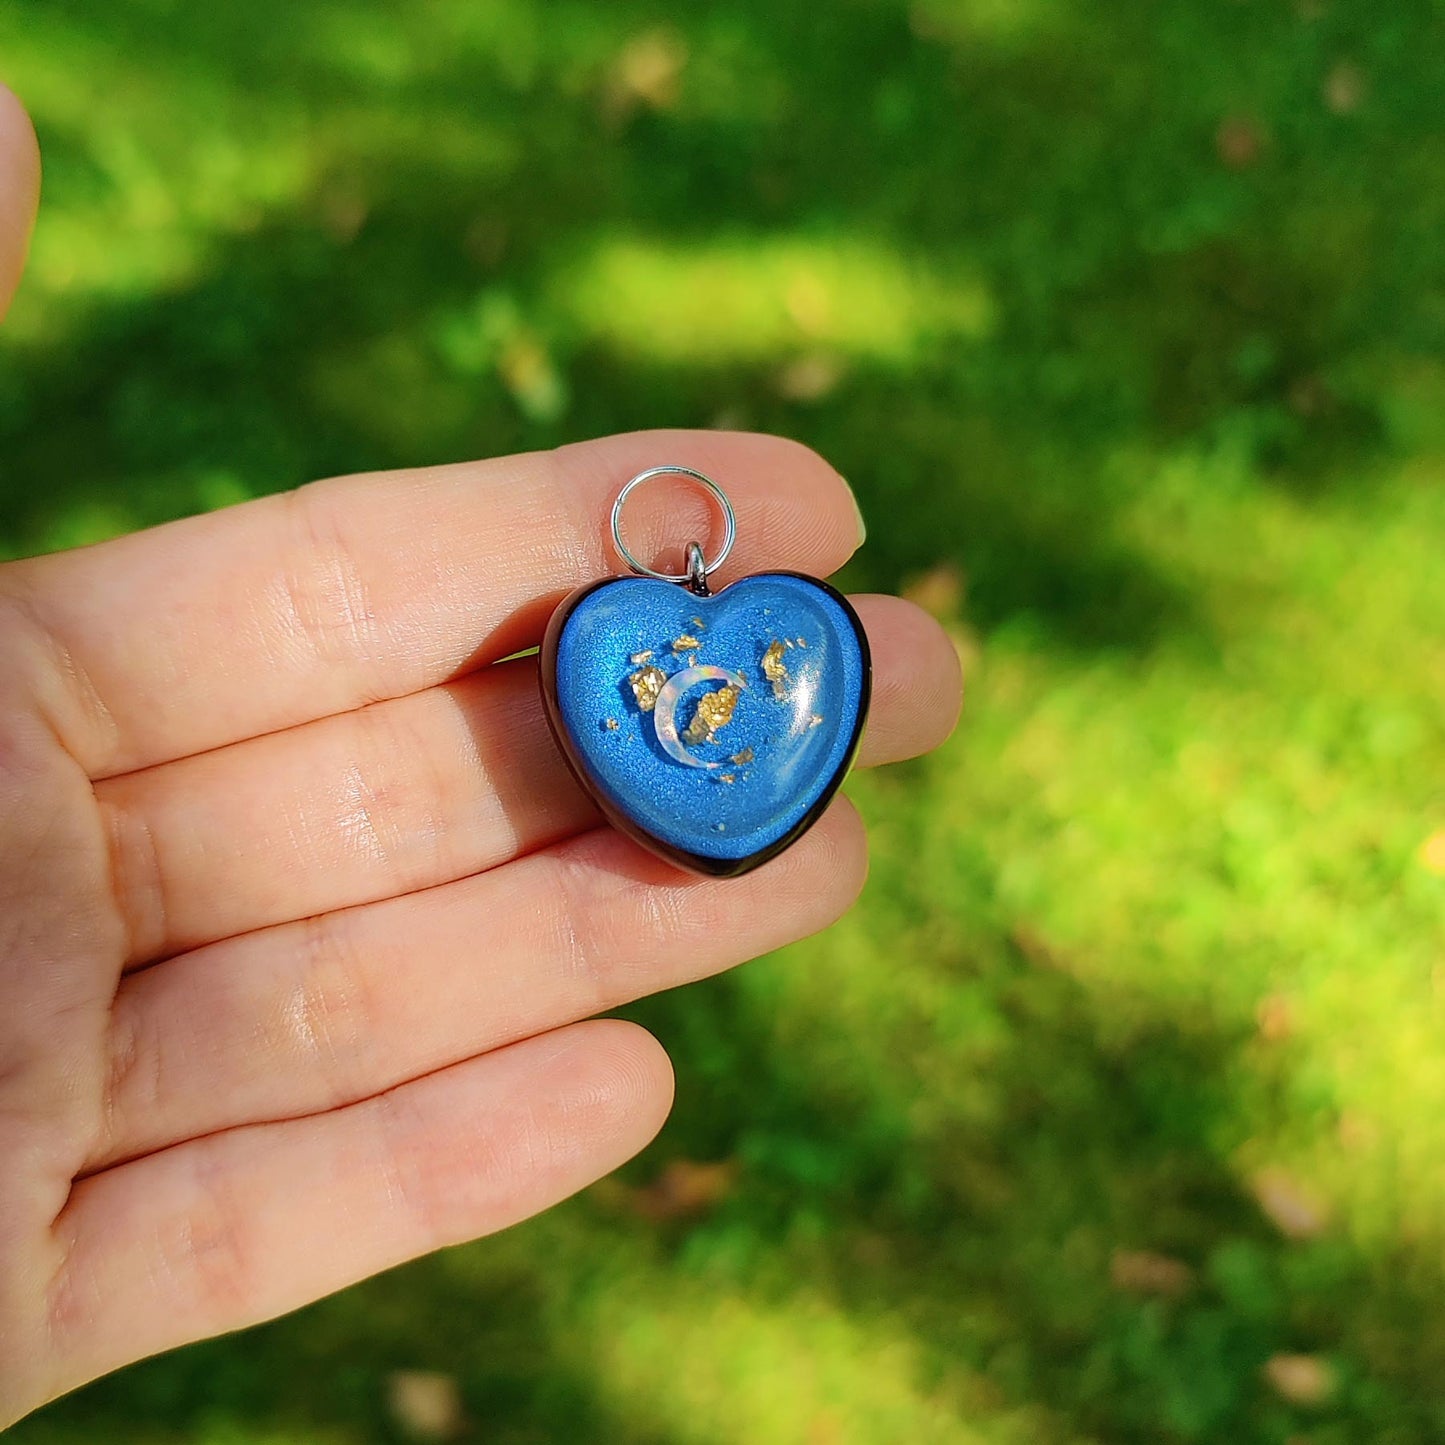 Kids or Pets Heart Shape Orgonite Necklace with Celestial Symbols For Throat Chakra